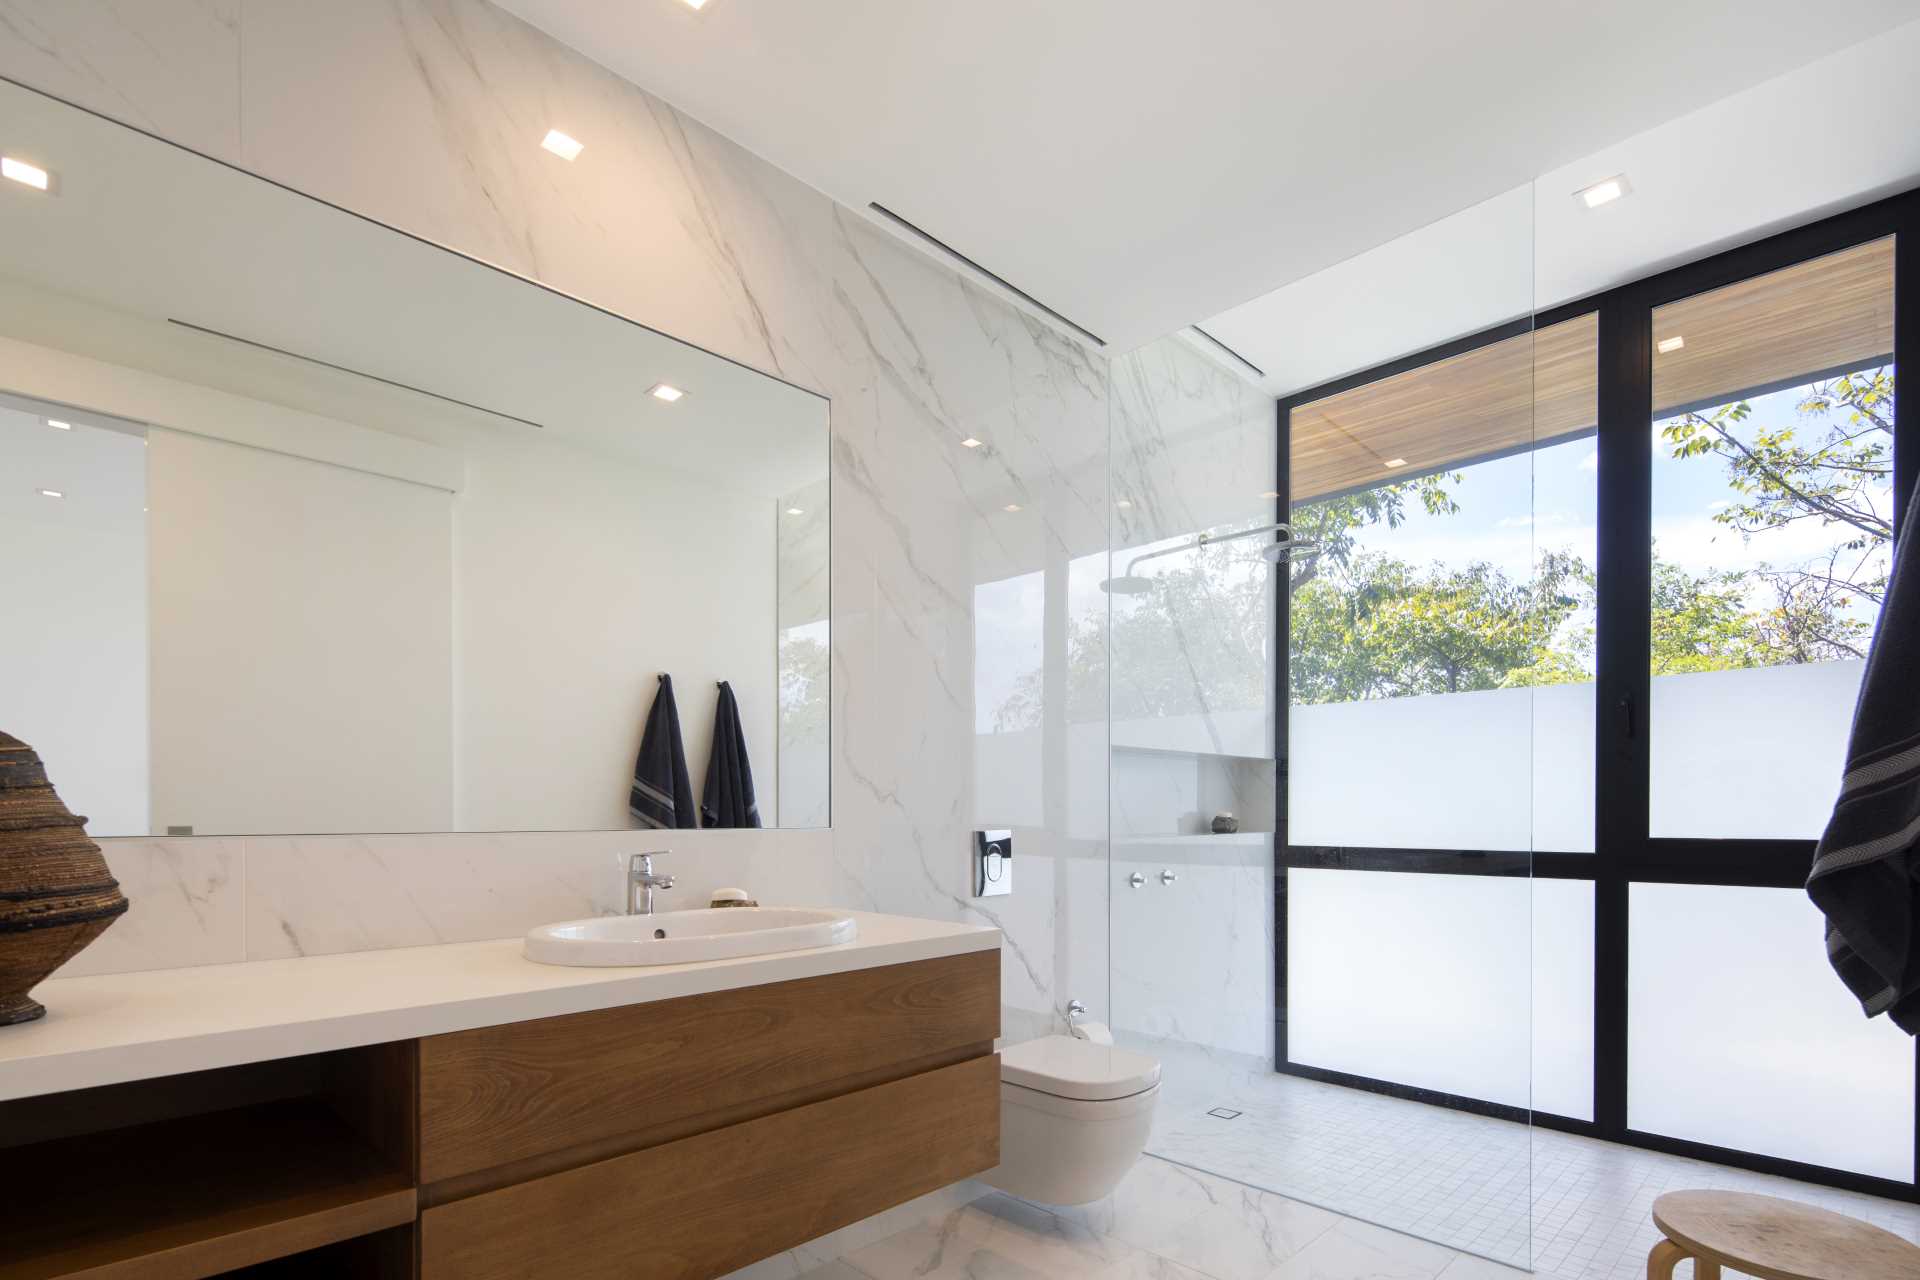 A contemporary bathroom design with a material color palette of wood, light colored tiles, white countertops, and gl،.